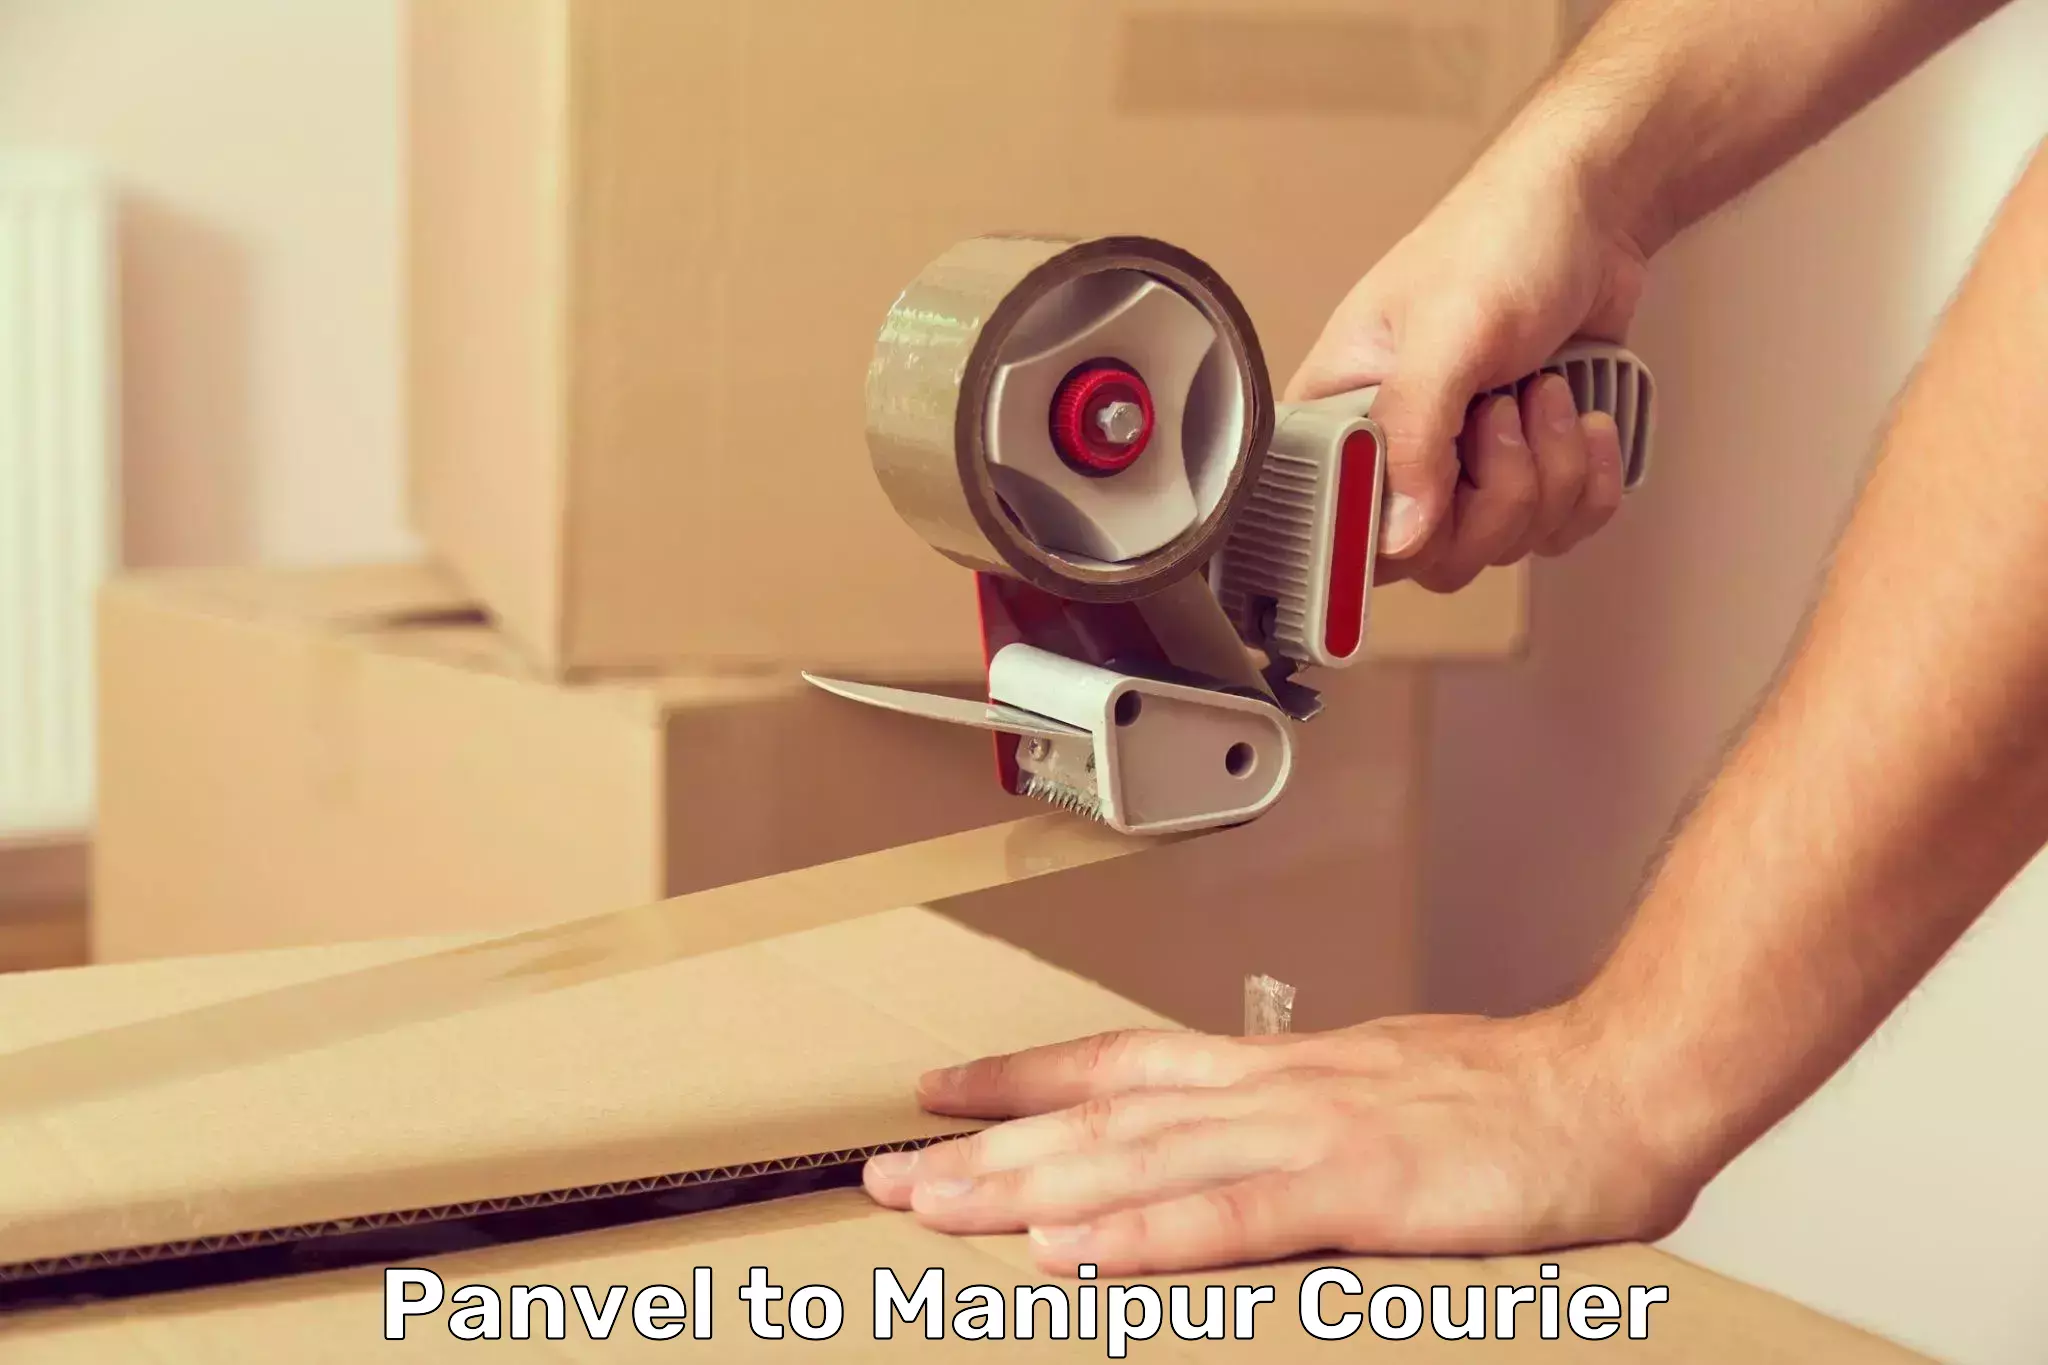 Same-day delivery solutions Panvel to Manipur